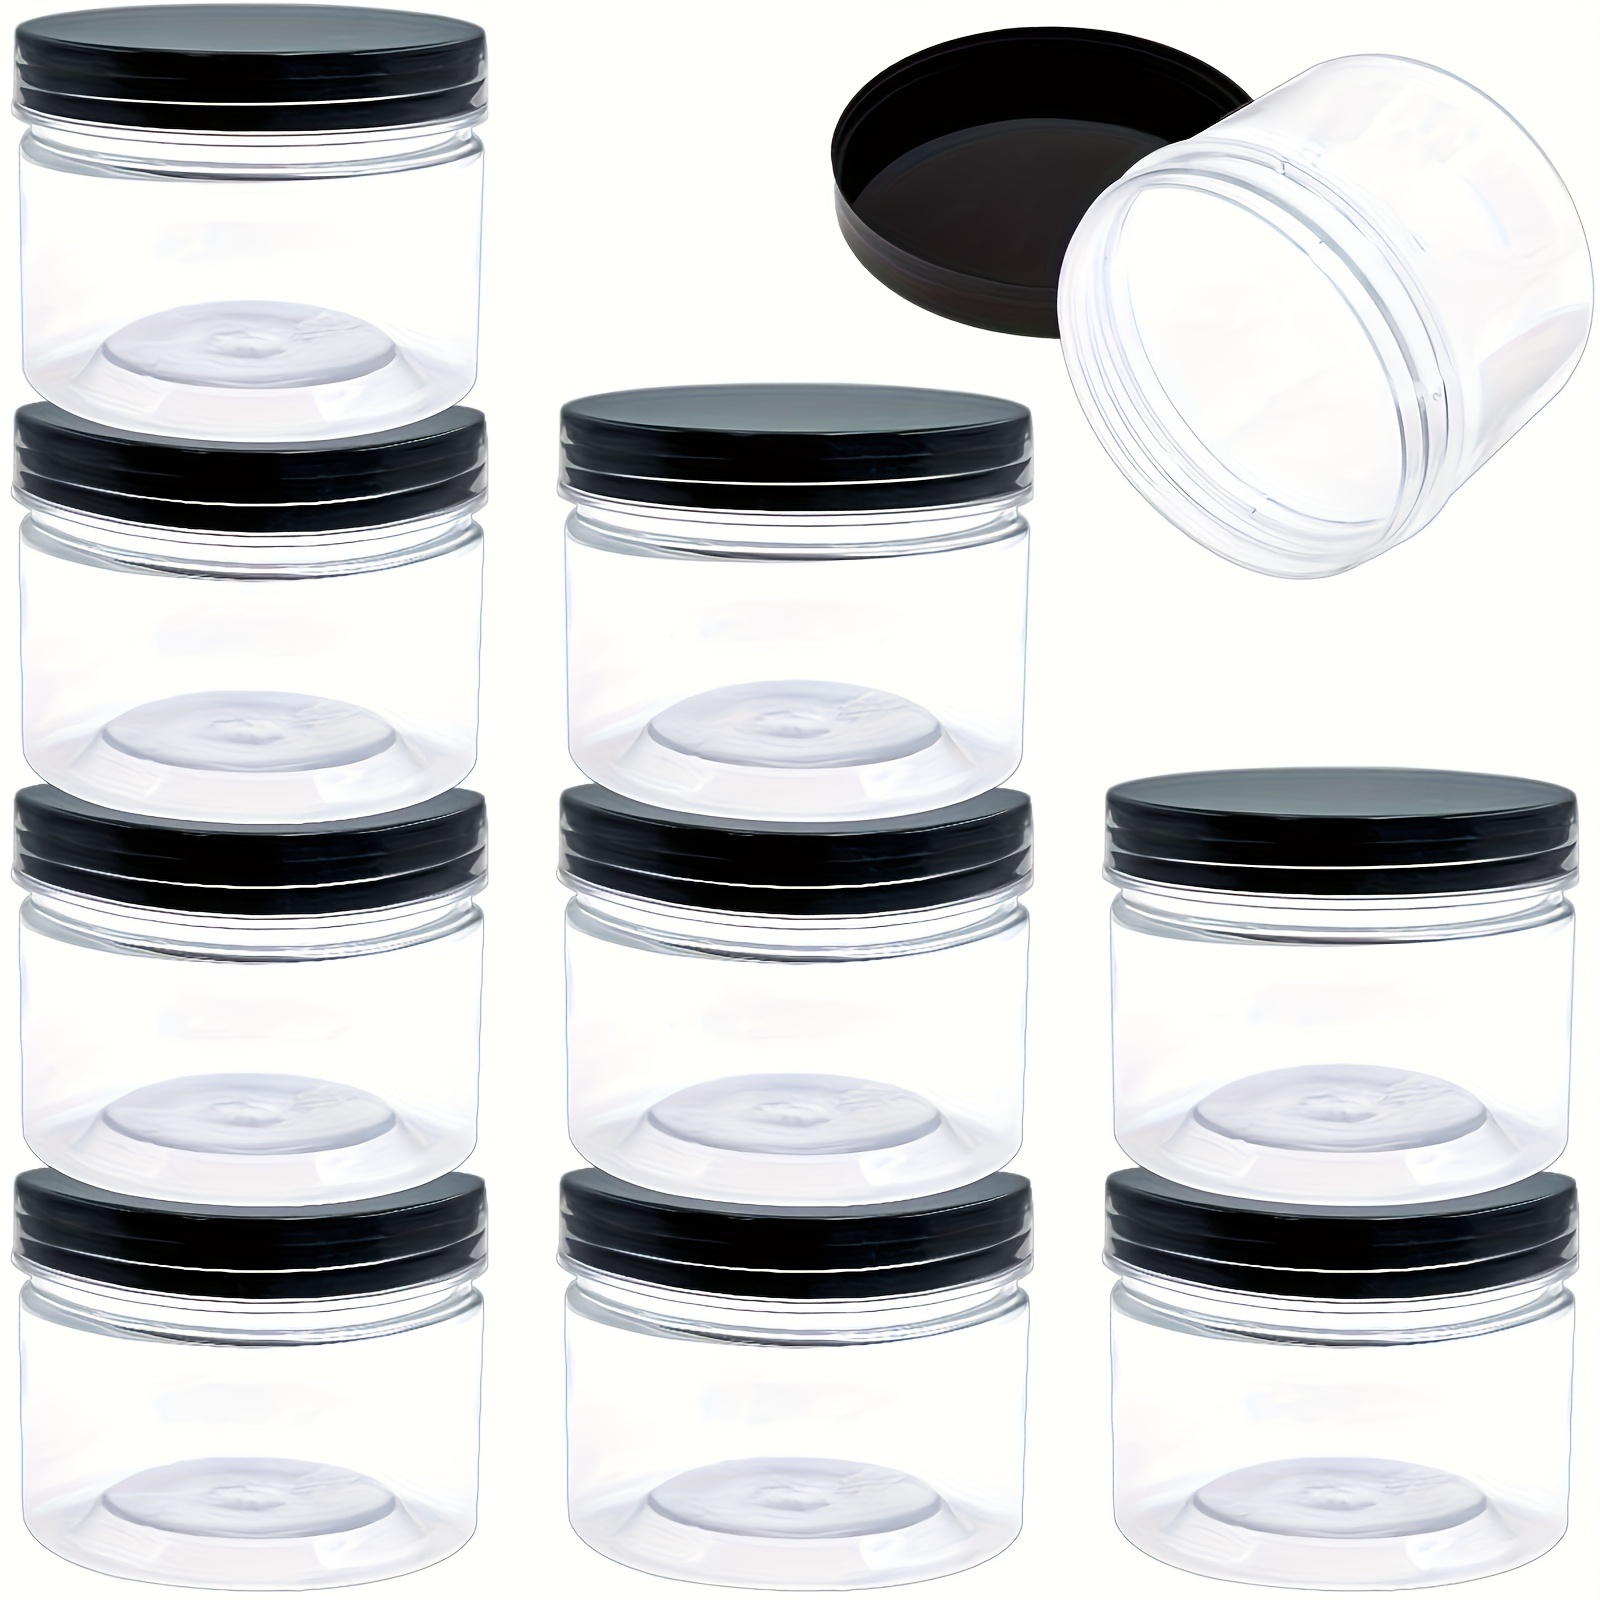 Plastic Jars With Lids, Jar With Lids, Plastic Mason Jar, Storage Containers  For Cosmetics, Slime Storage Jars, Desert Containers, Airtight Plastic Jar  With Lid, 6 Pack (5 oz, Silver)